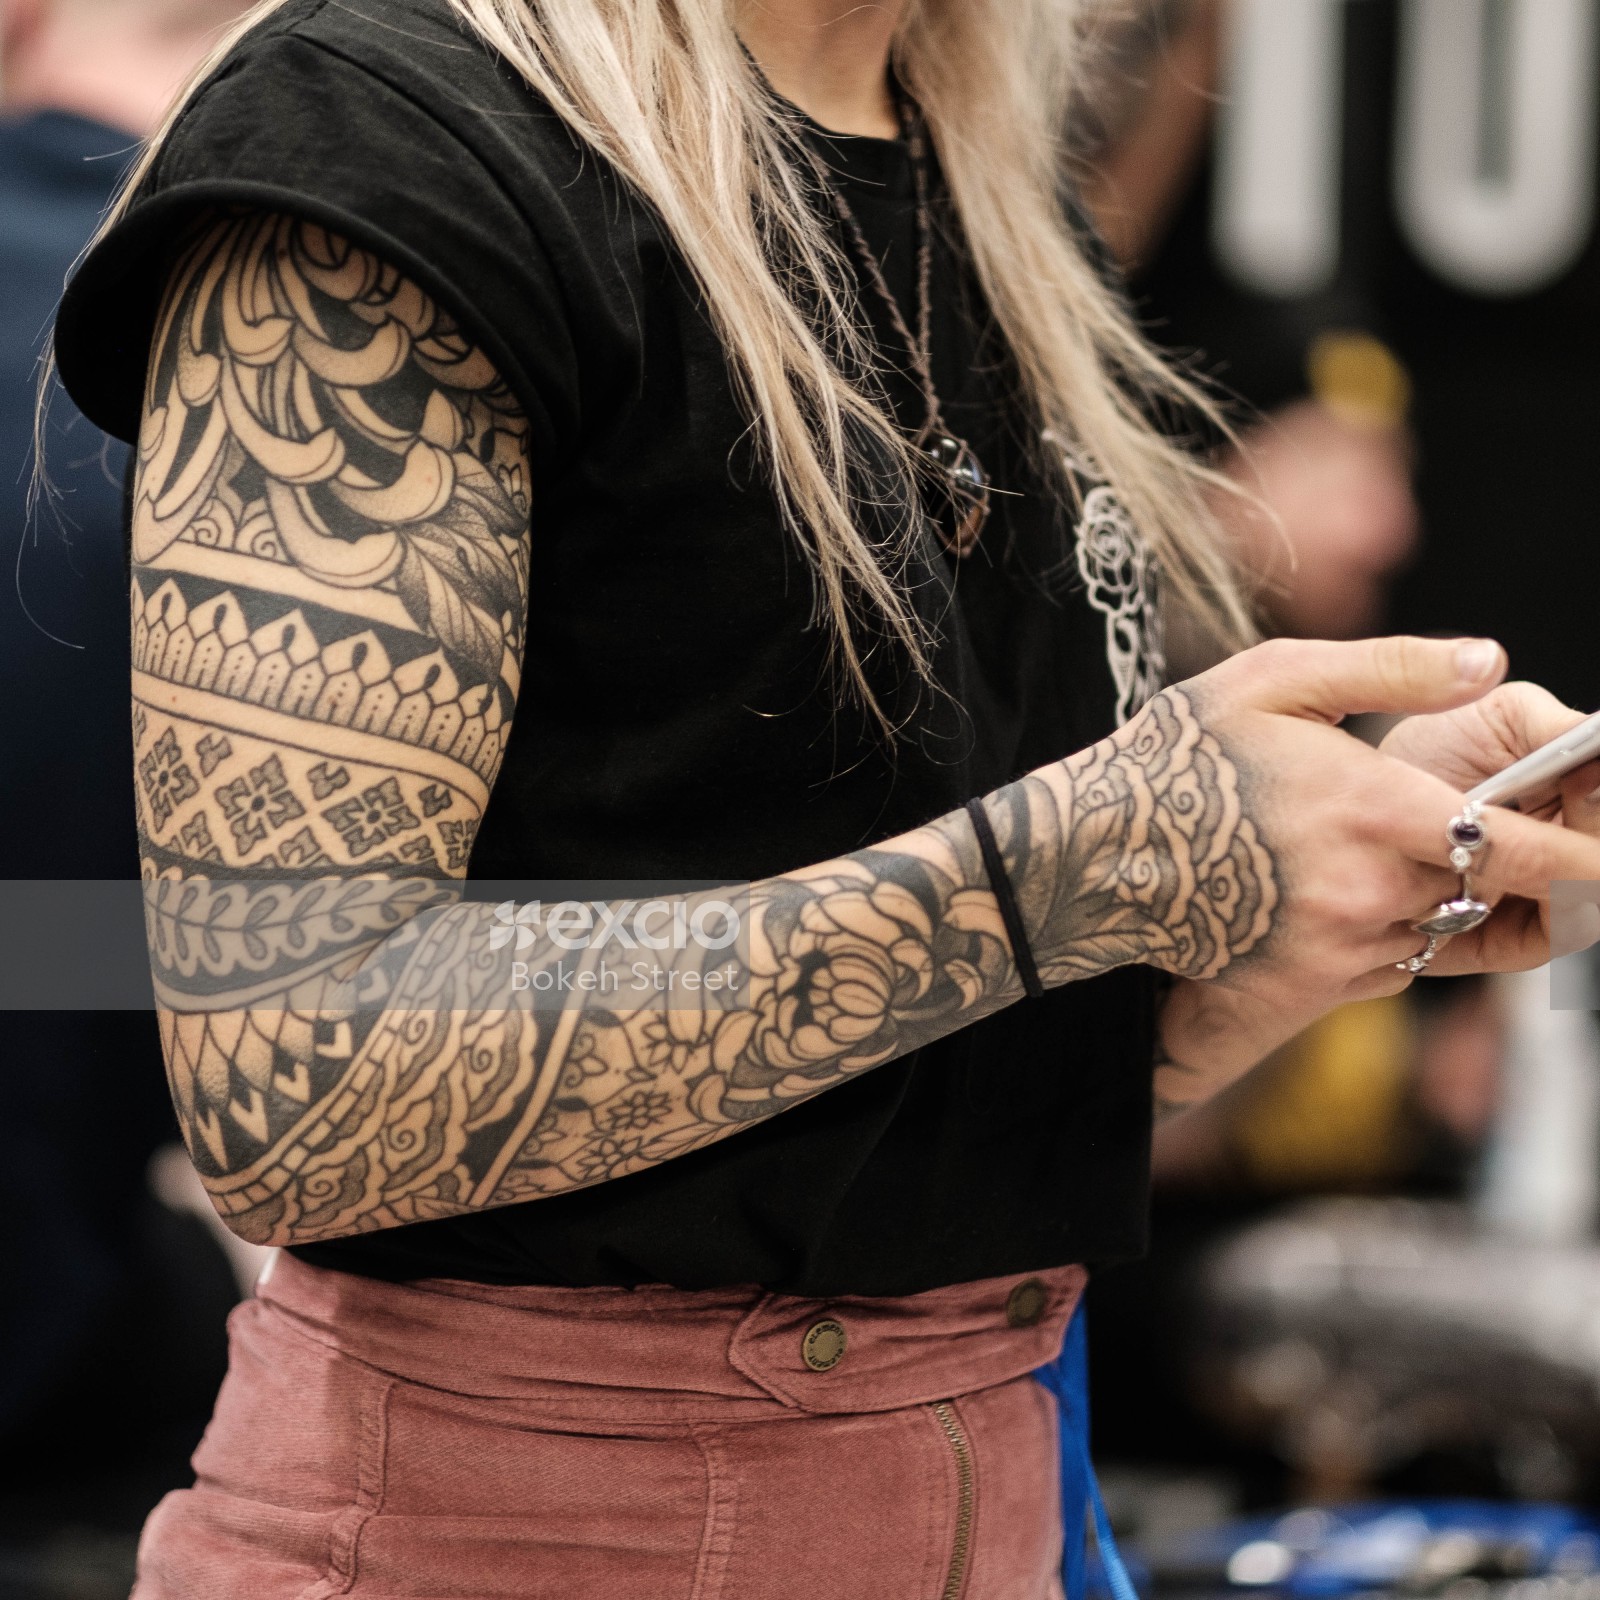 Tattooed arm of a woman wearing pink pants